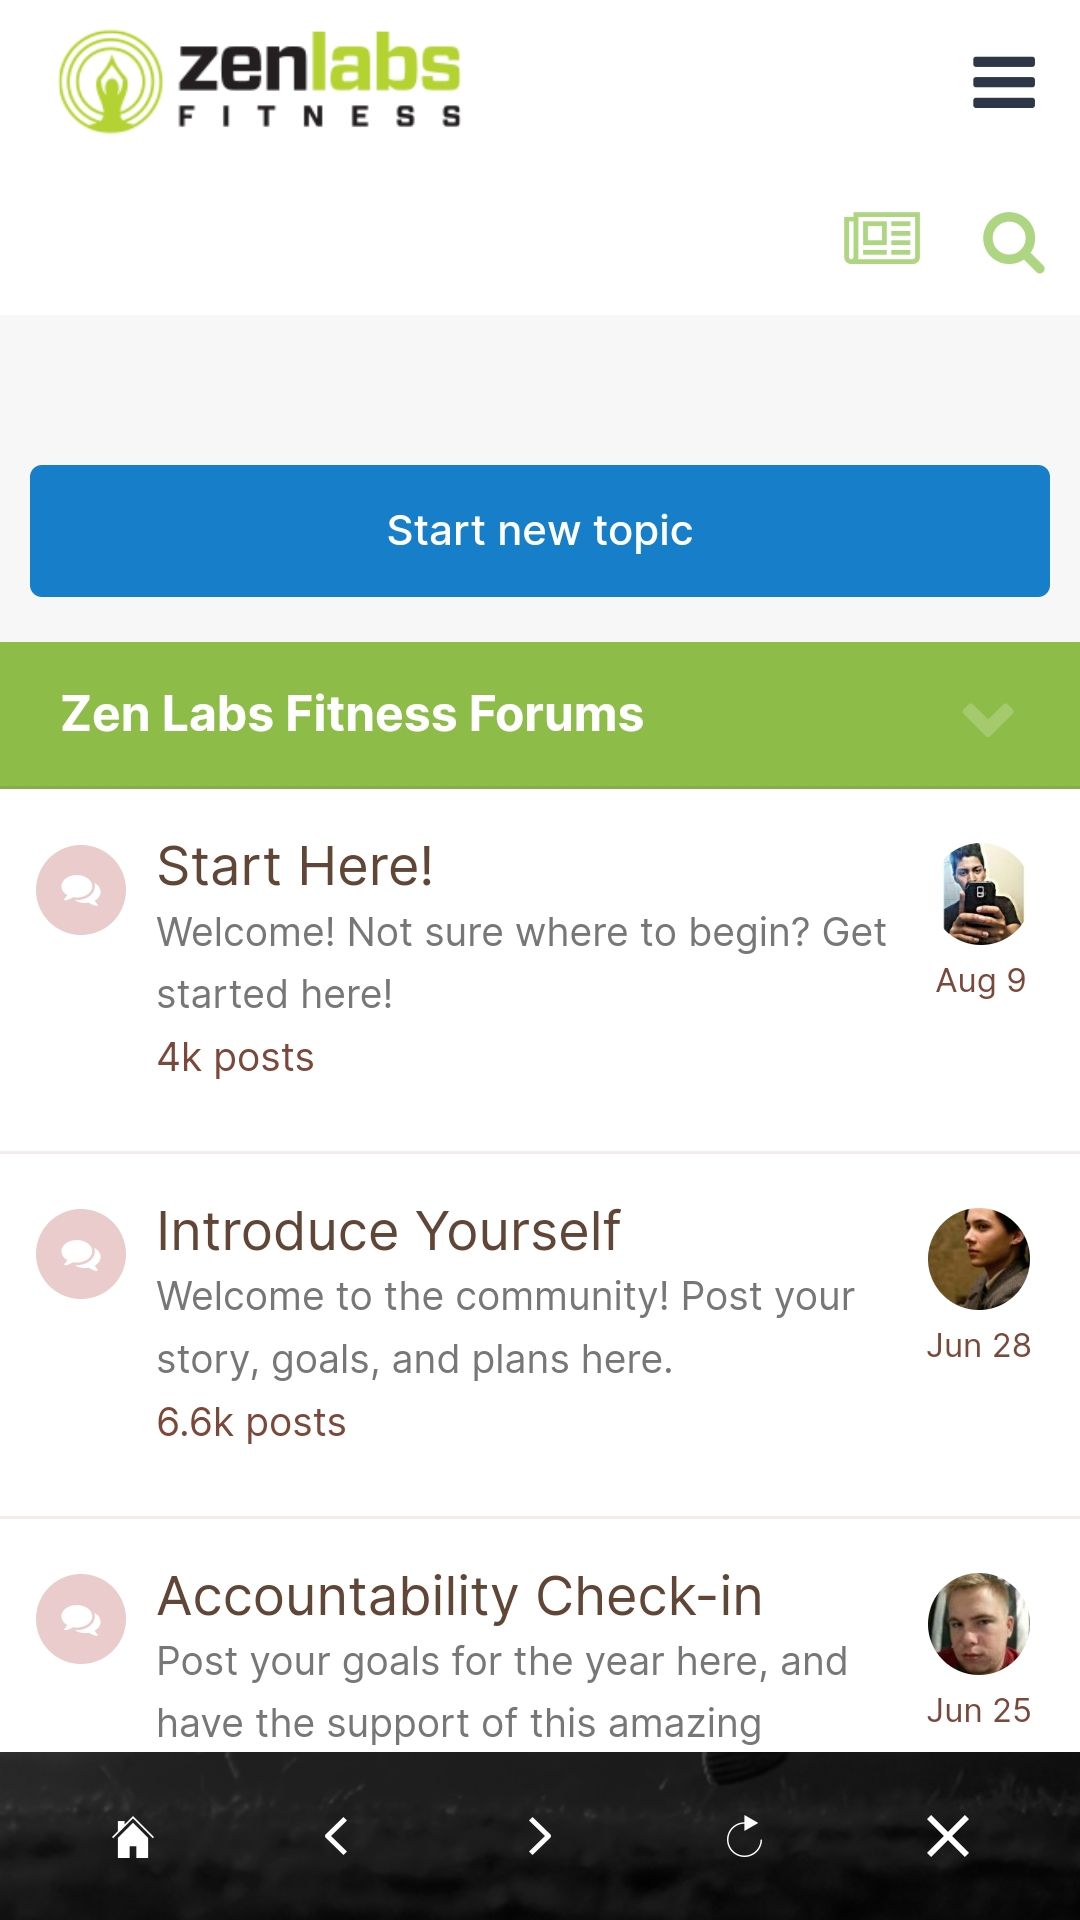 C25K mobile couch to 5K training app community forum